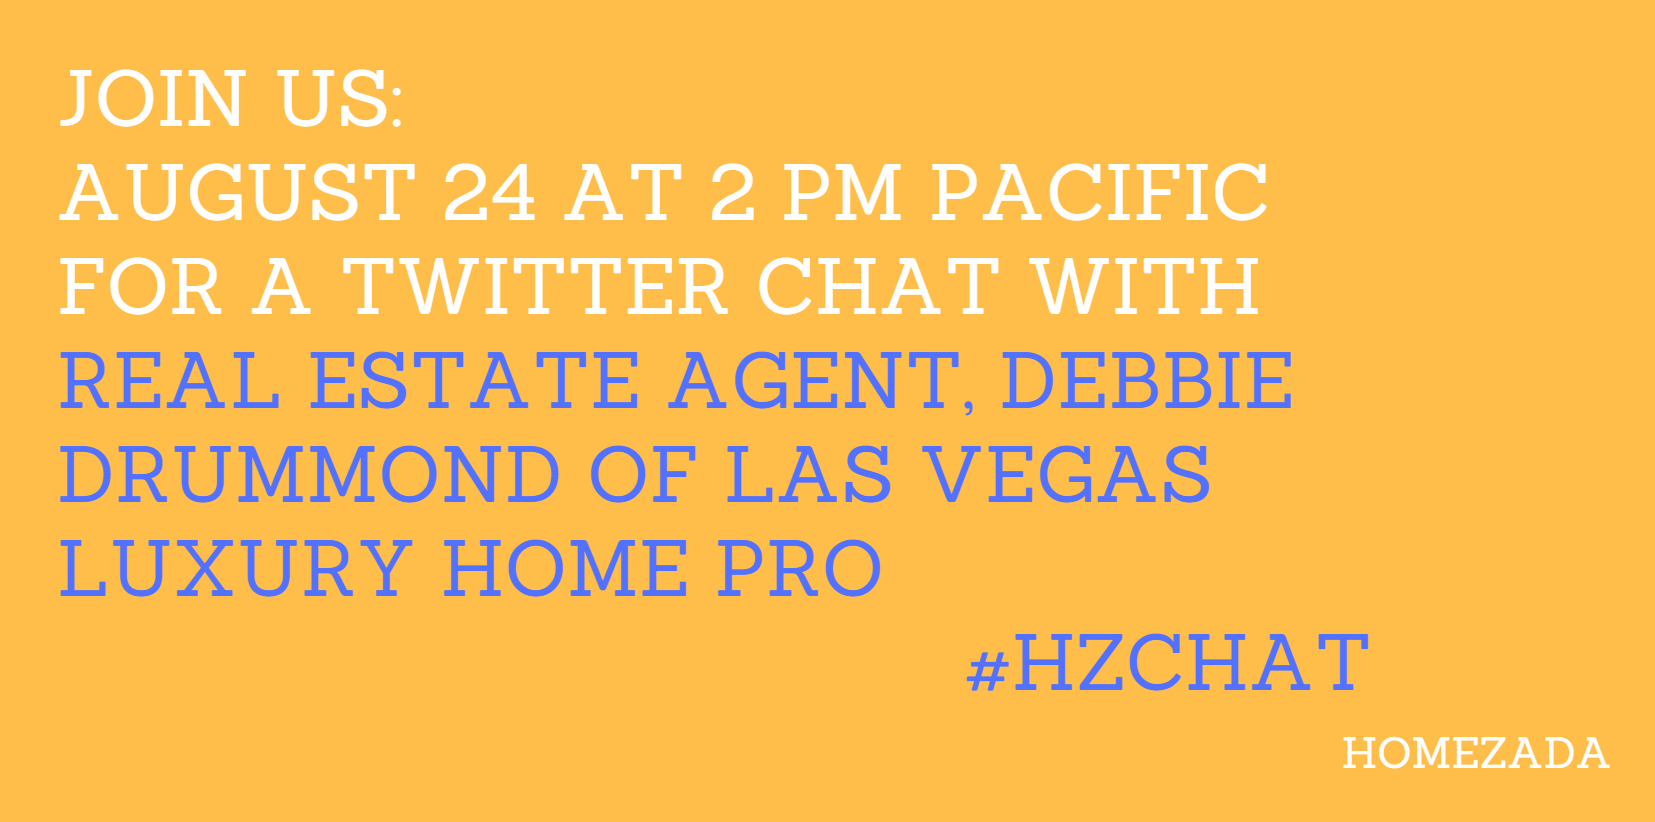 Twitter Chat with Real Estate Expert Debbie Drummond